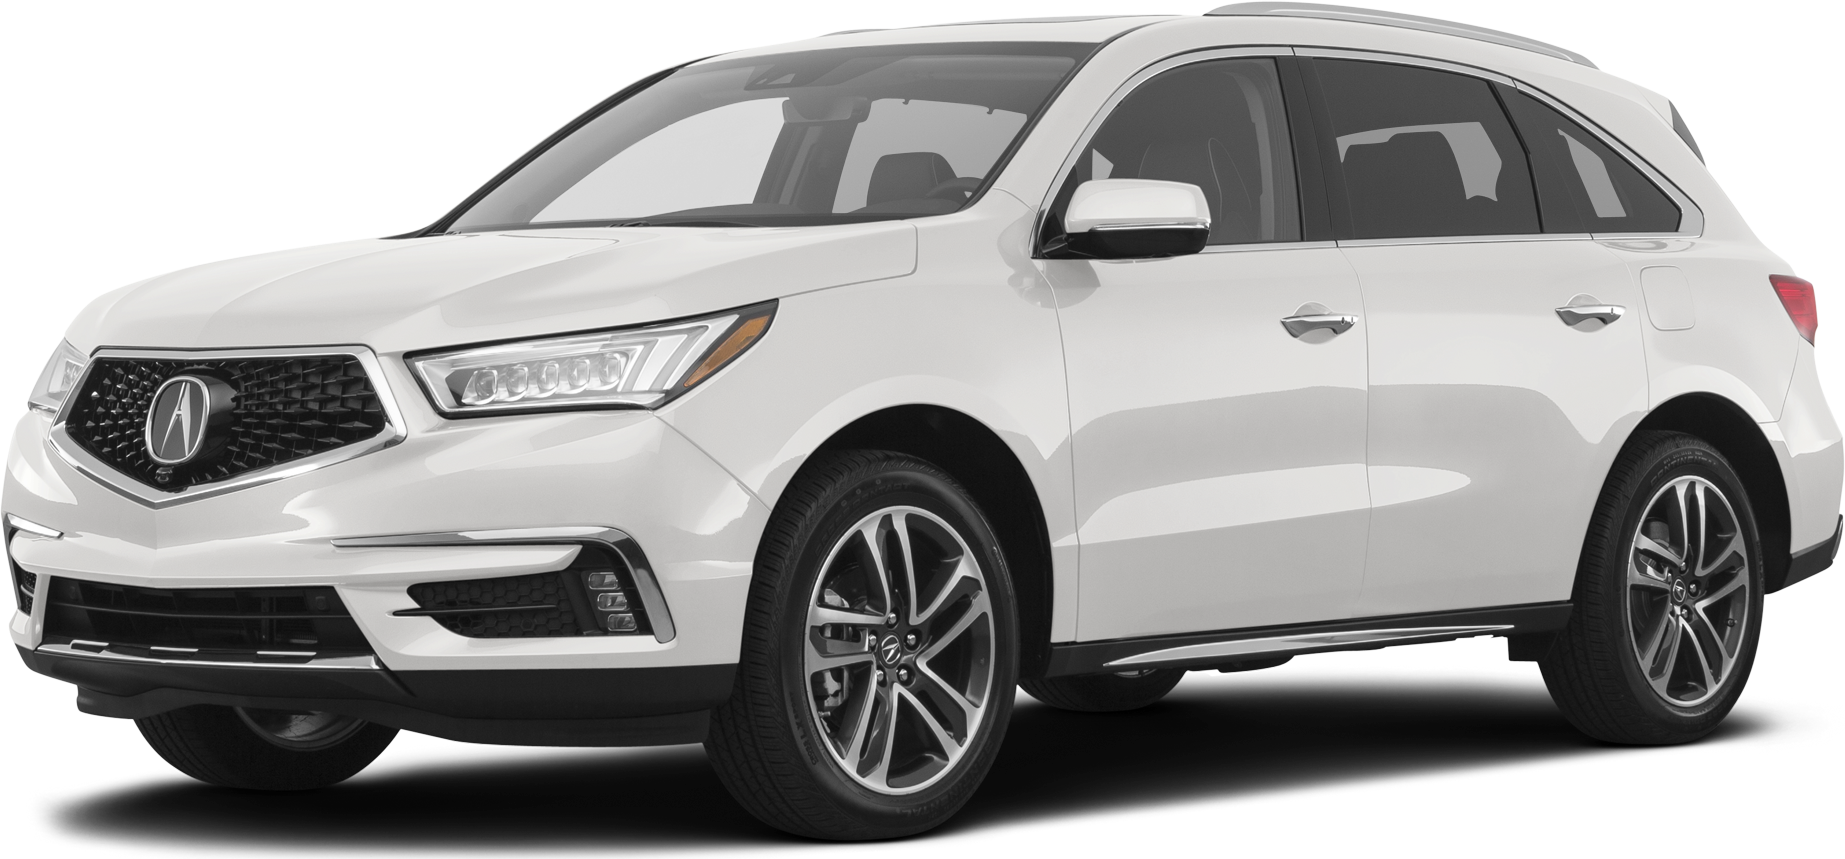 2017 Acura Mdx Value Ratings